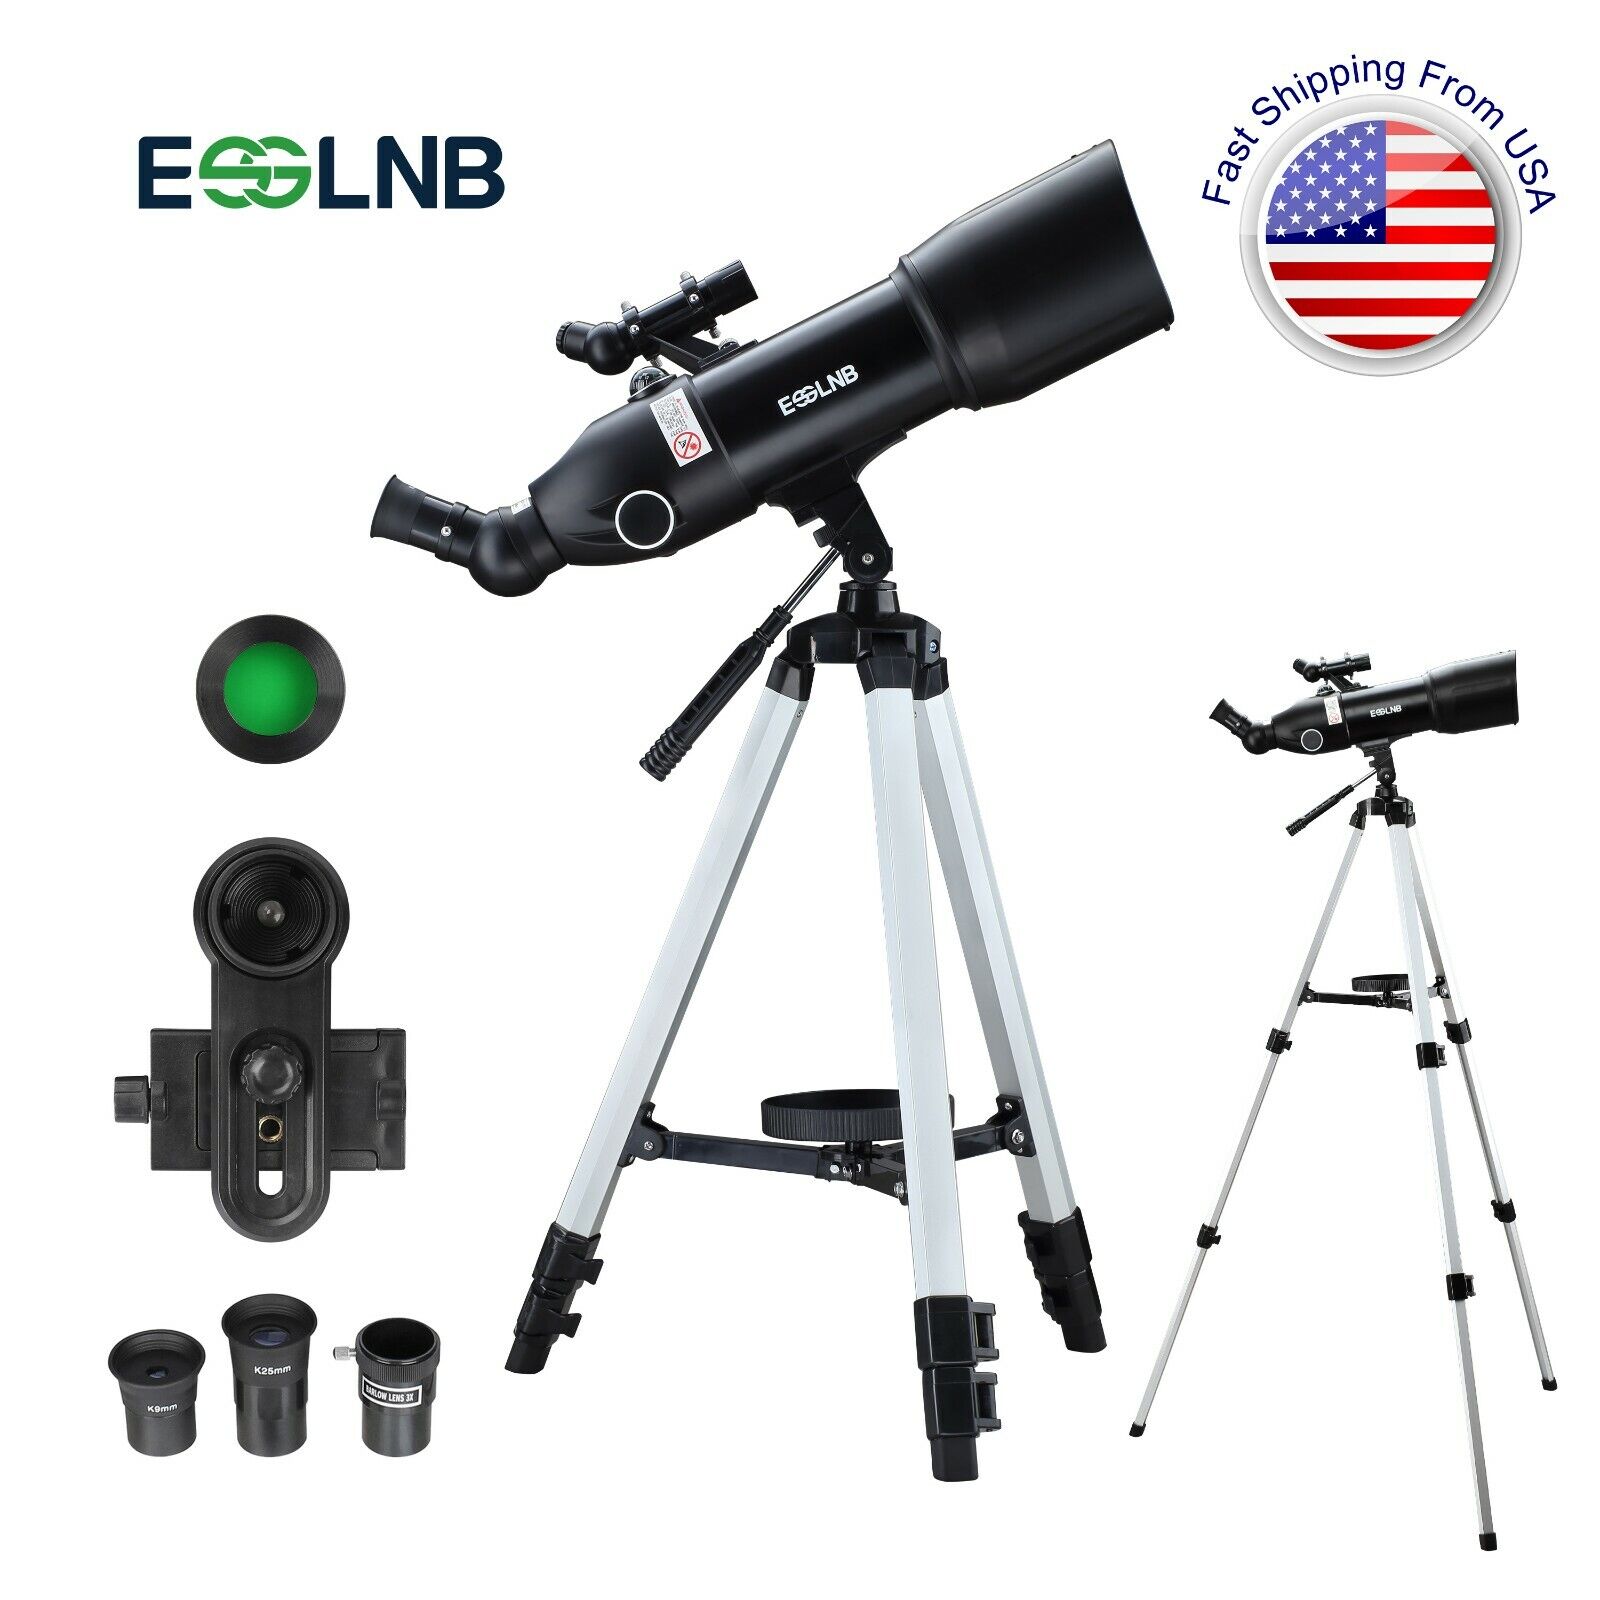 16-133X High Magnification Telescope 80mm Lens with Adjustable Tripod Carry Bag